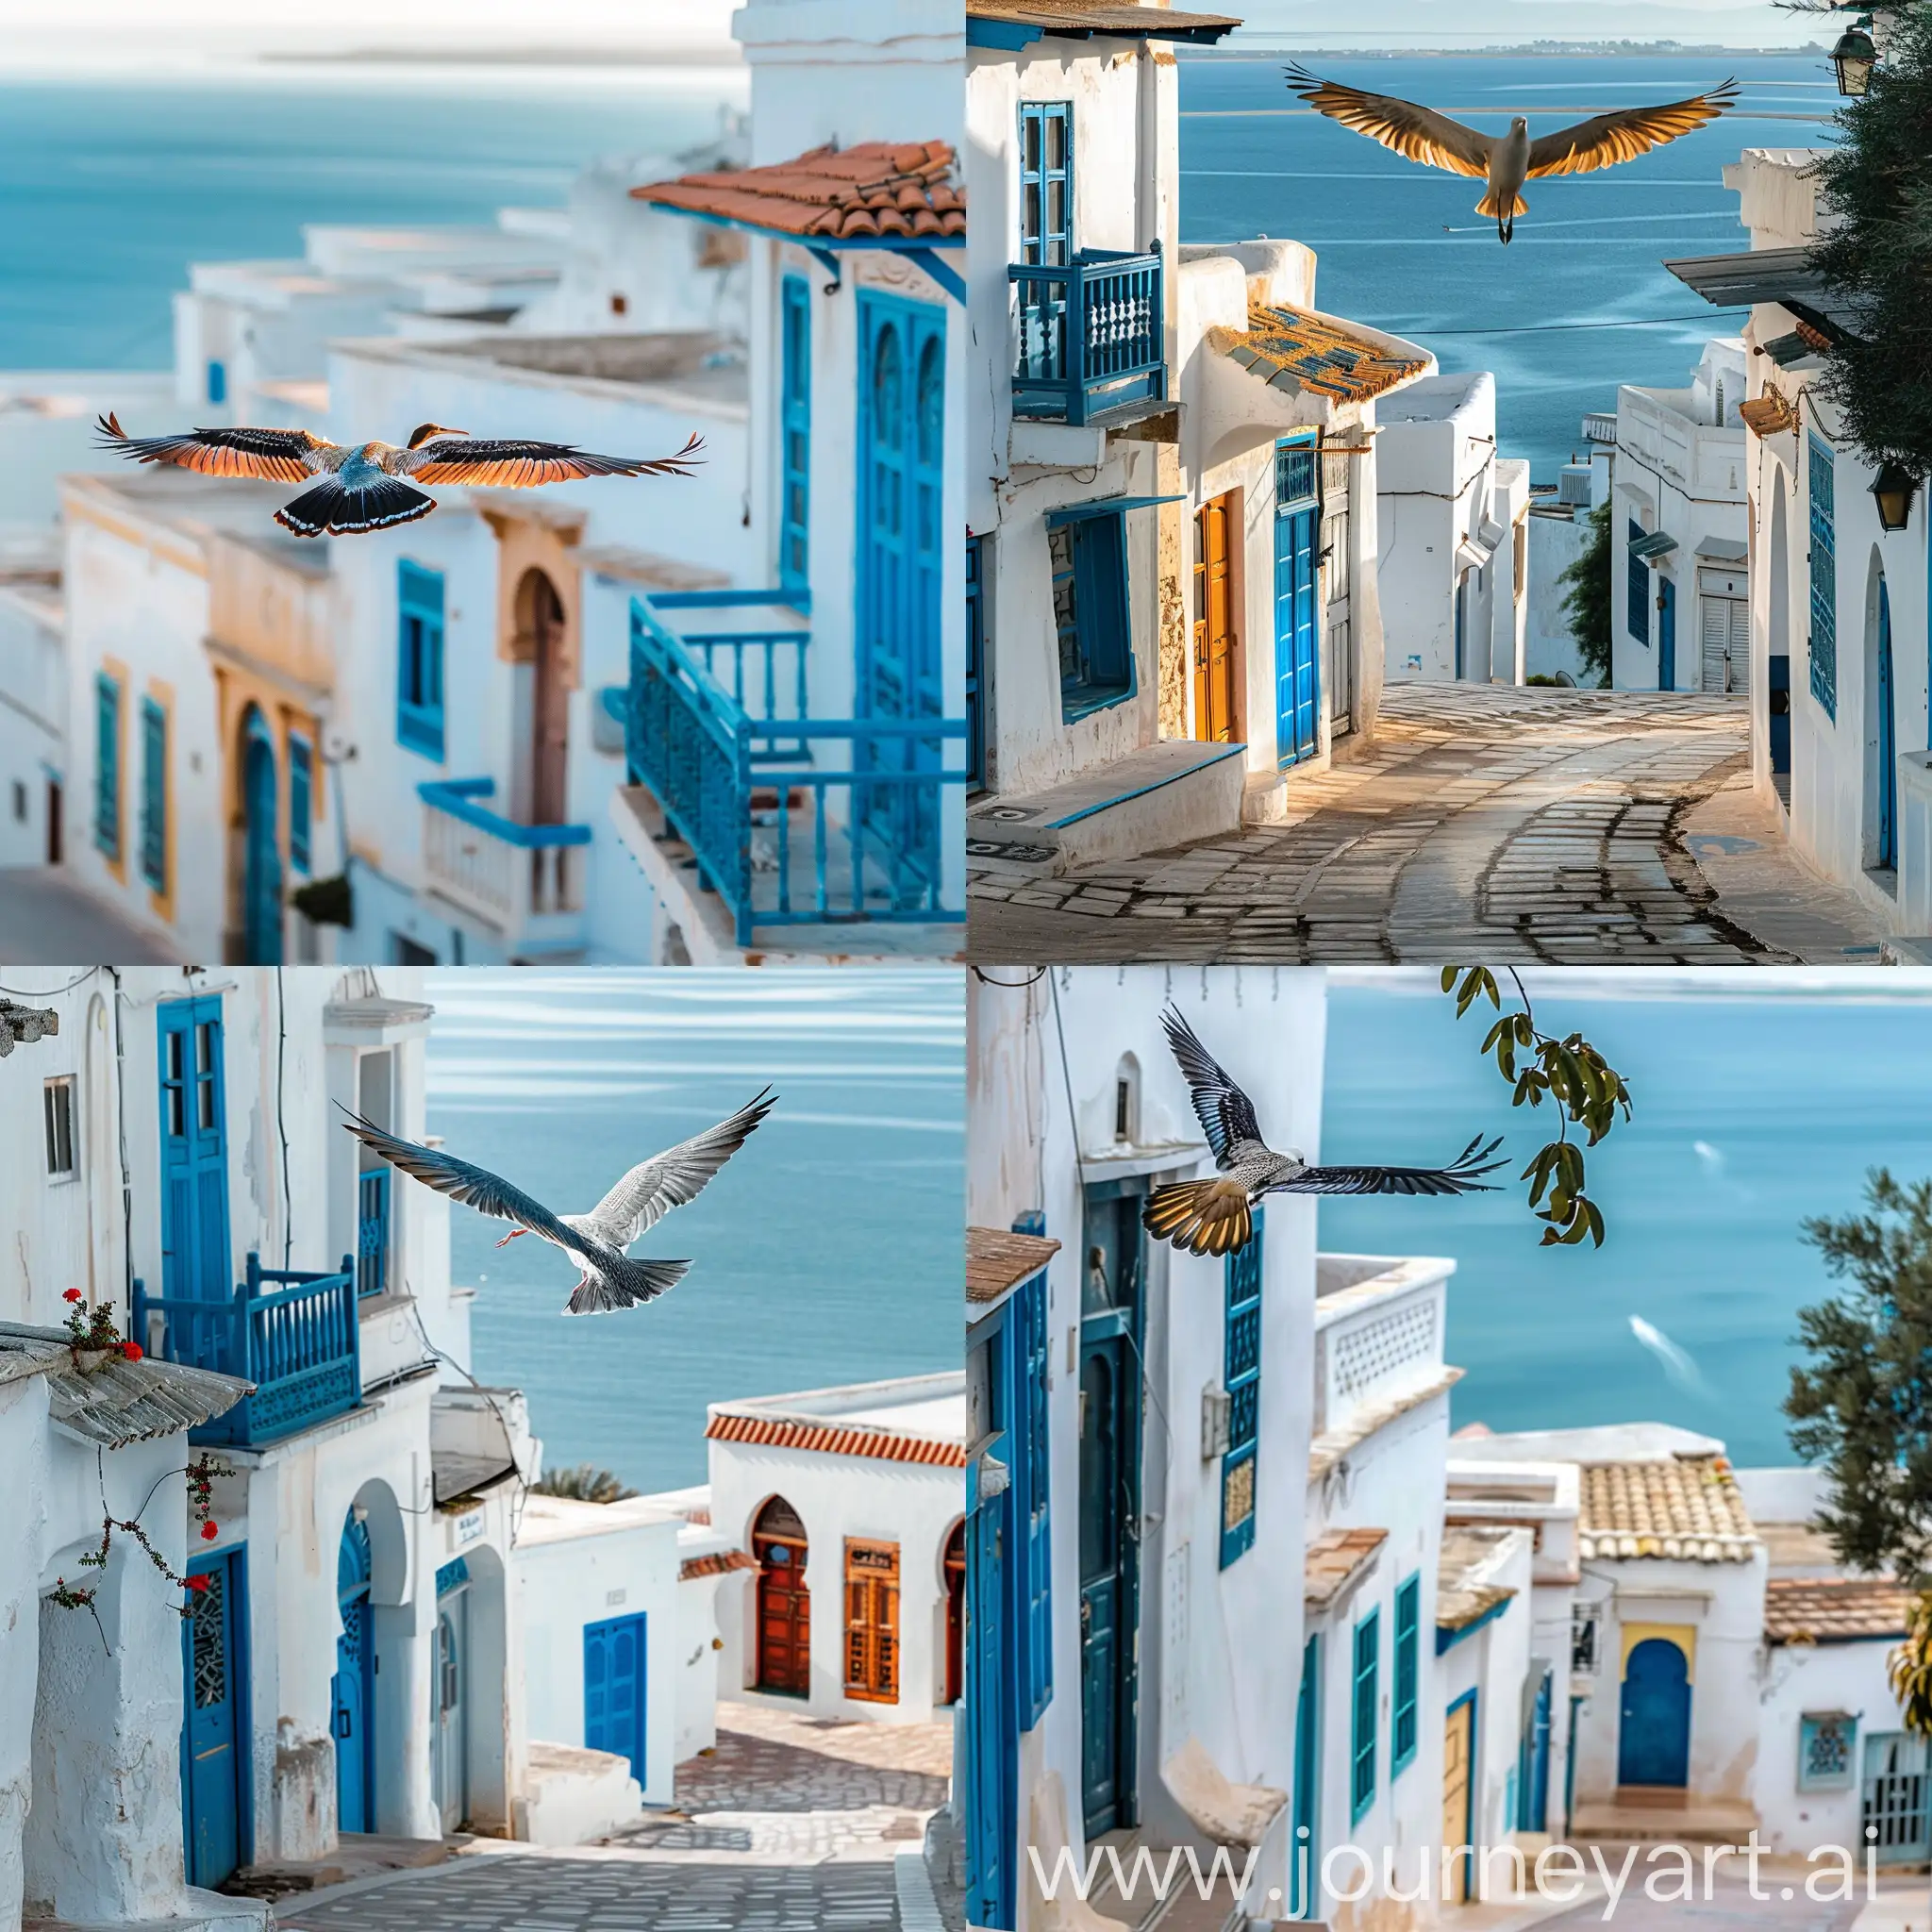 Generate an image: In the enchanting village of Sidi Bou Said, Tunisia, a solitary bird takes flight against a backdrop of whitewashed buildings and cobalt blue accents. With wings outstretched, it soars gracefully over the winding streets and terracotta rooftops, its feathers catching the golden rays of the sun. The vibrant hues of its plumage mirror the colorful doors and windows that adorn the village, adding a touch of natural beauty to the picturesque landscape. Against the backdrop of the azure Mediterranean Sea, the bird navigates effortlessly, symbolizing freedom, resilience, and the timeless spirit of Sidi Bou Said.